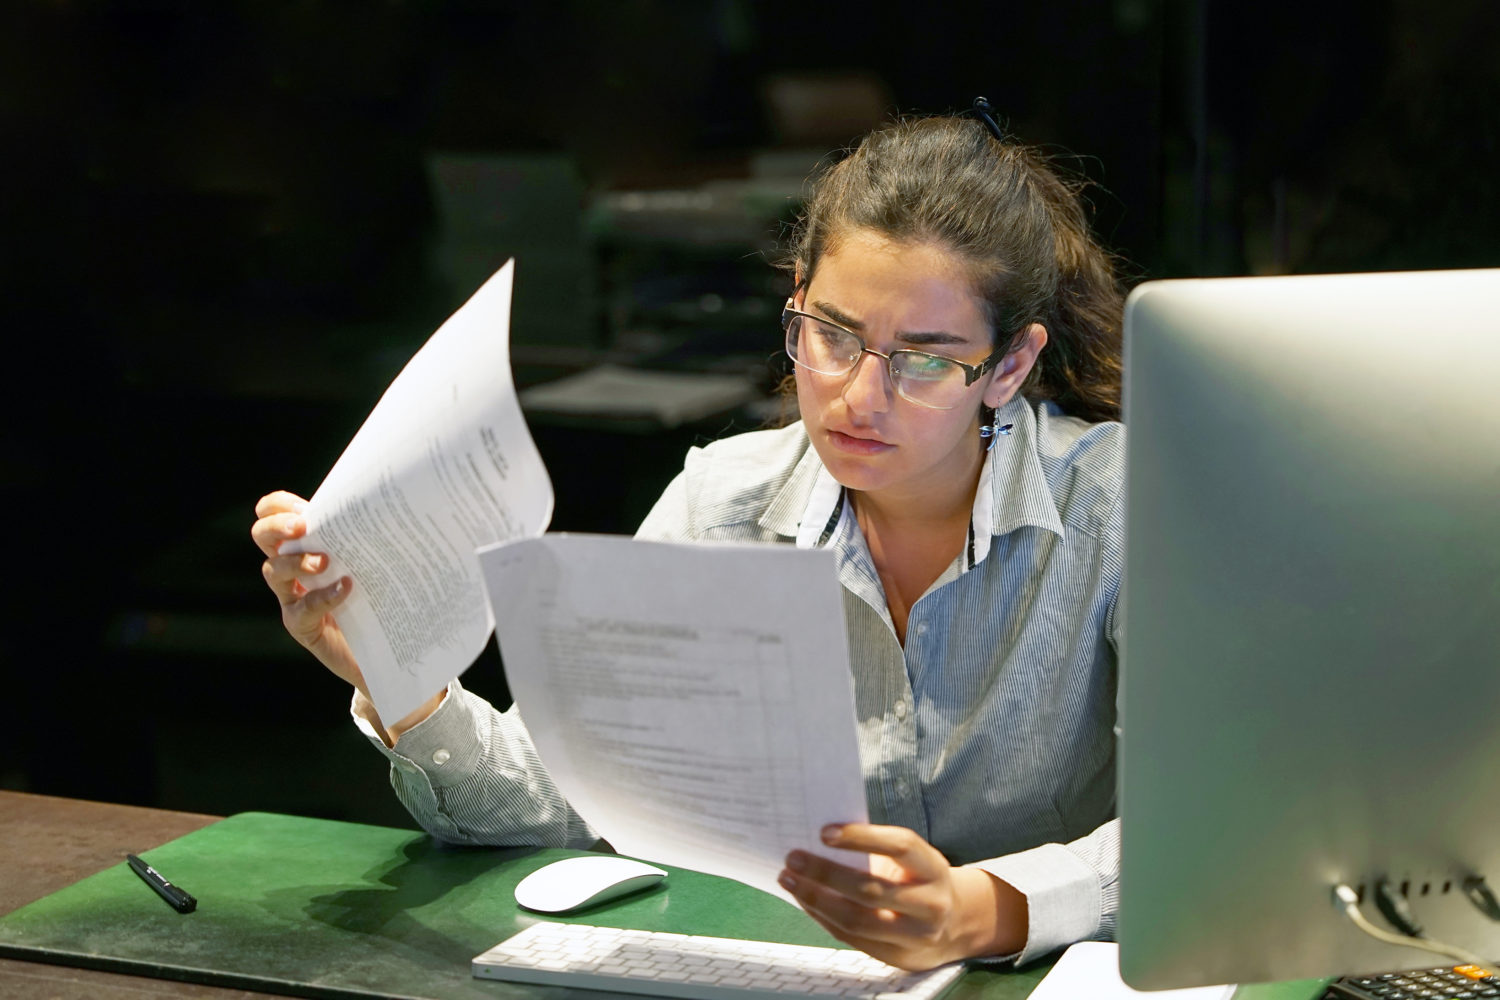 woman at computer reading paper with concentrated look on her face